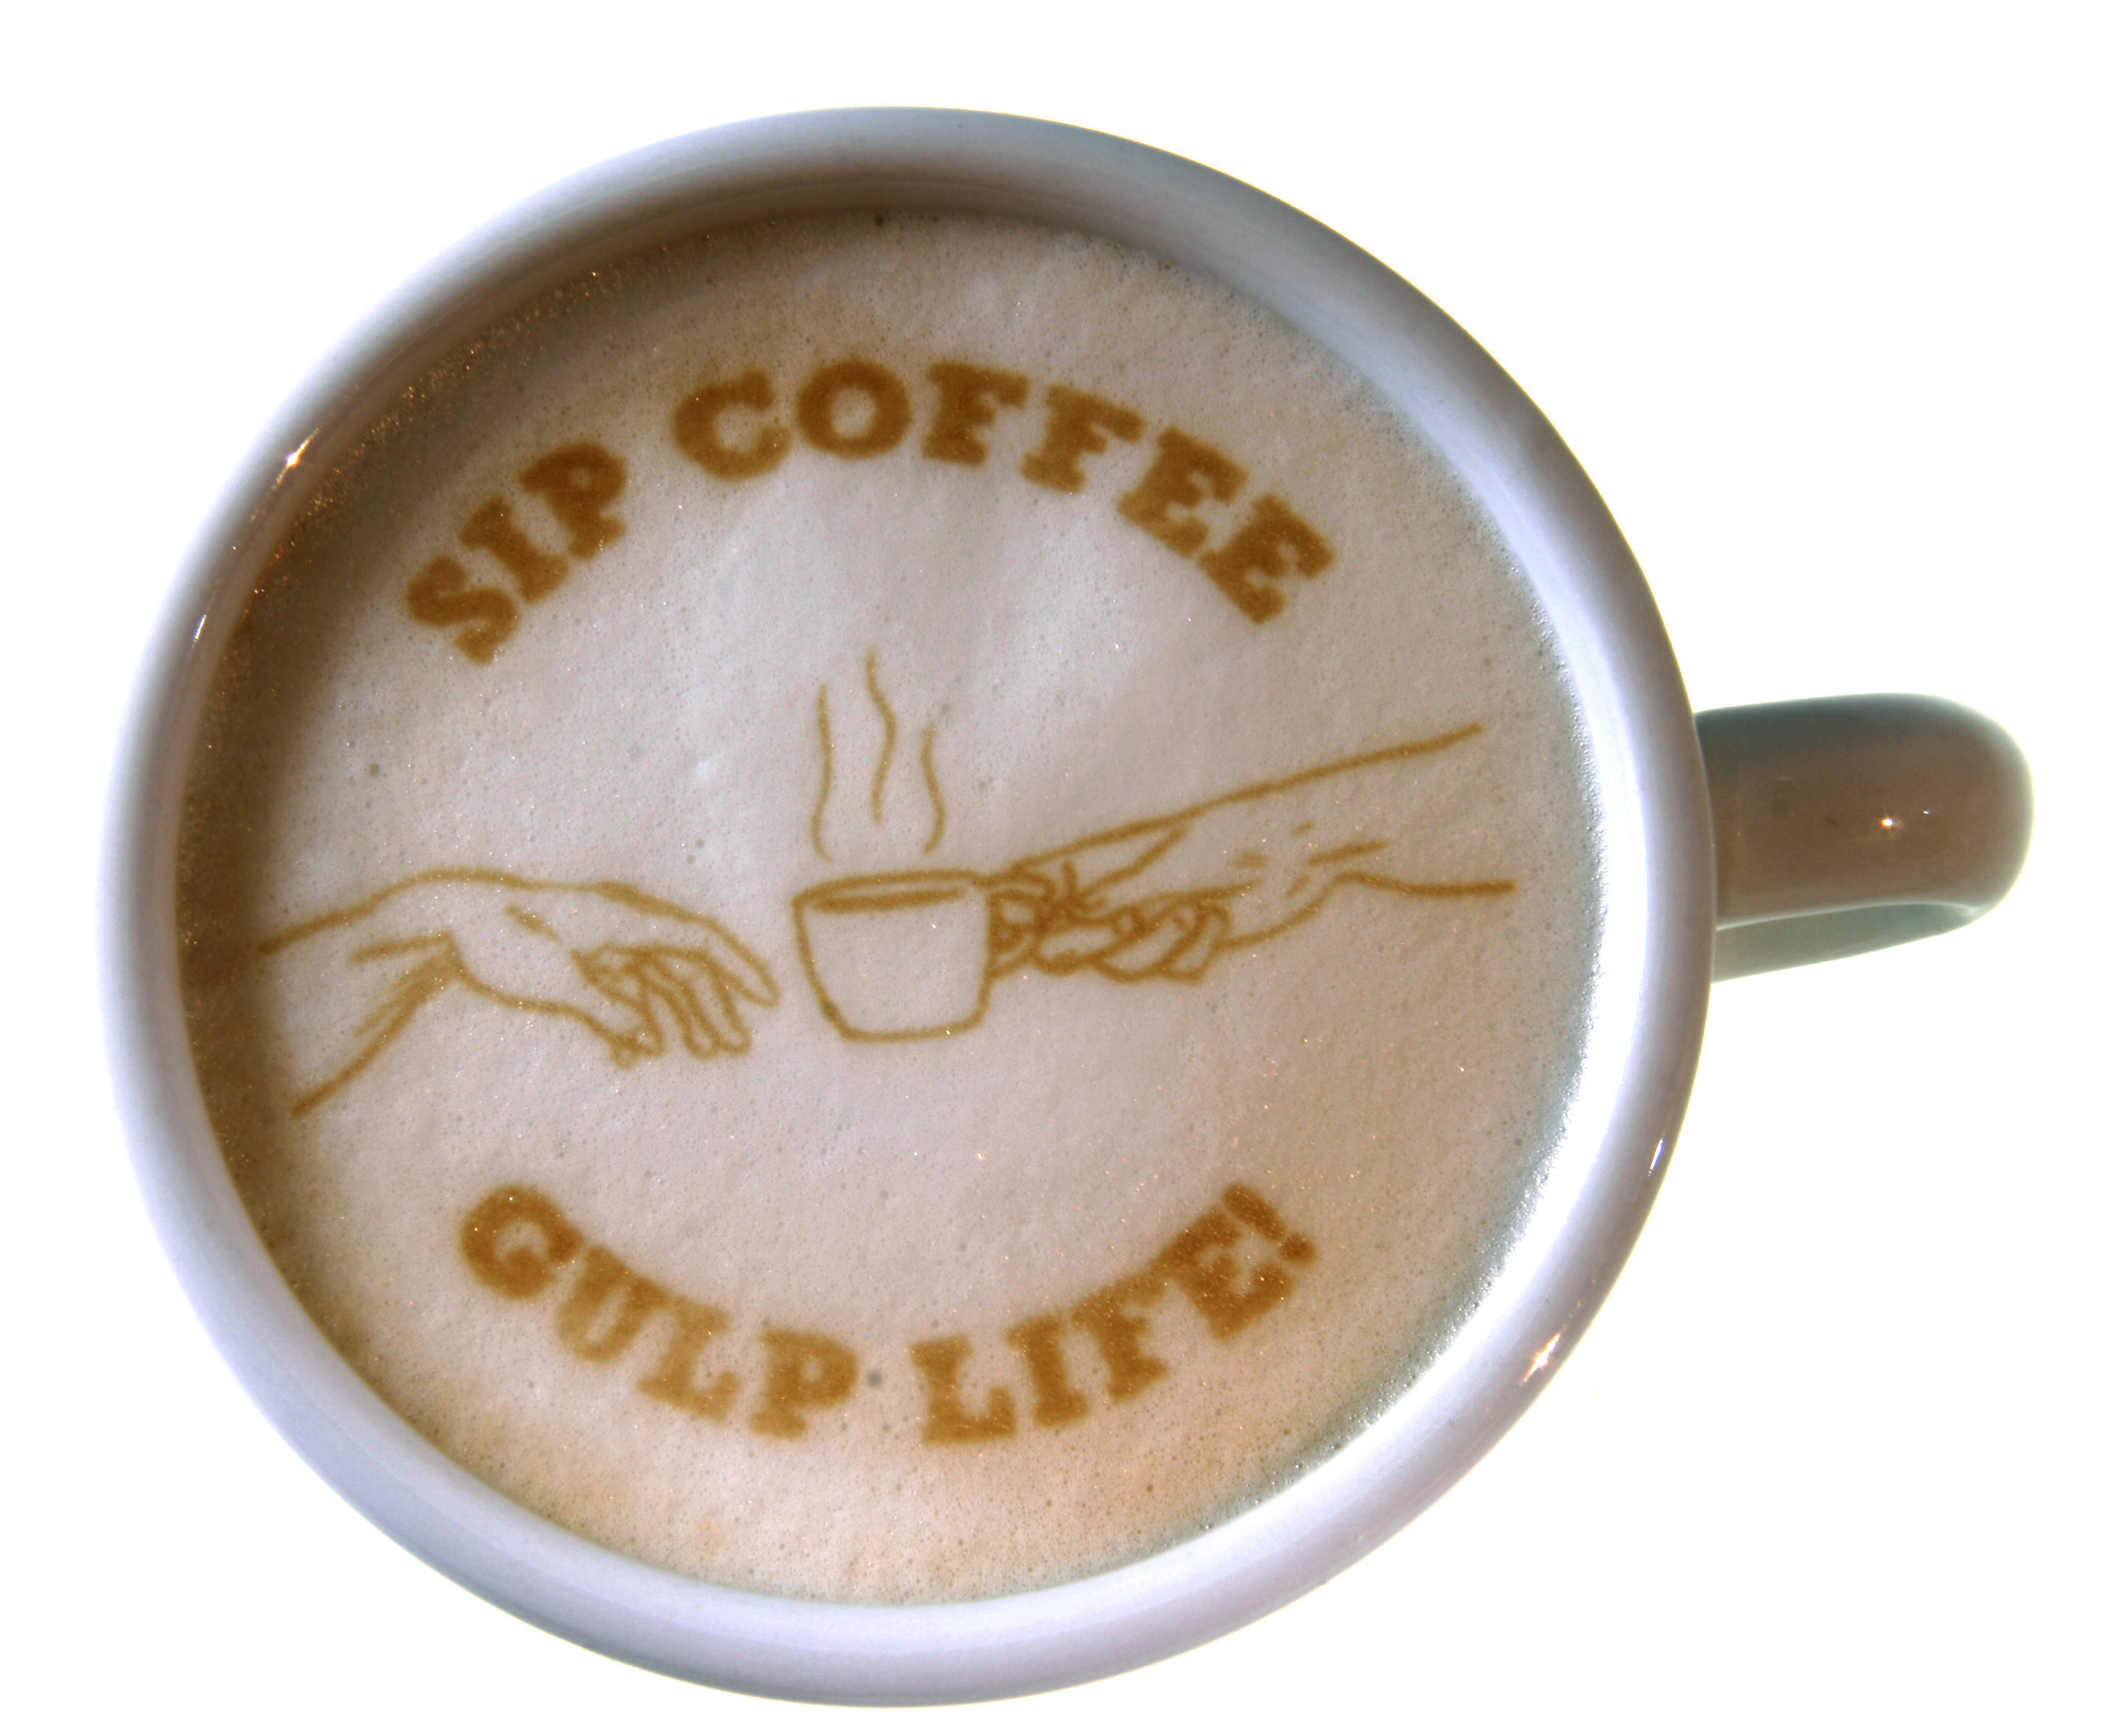 Ripples combines hardware and software to deliver any image of message onto lattes, cappuccinos, or any foam-topped drink.   www.coffeeripples.com